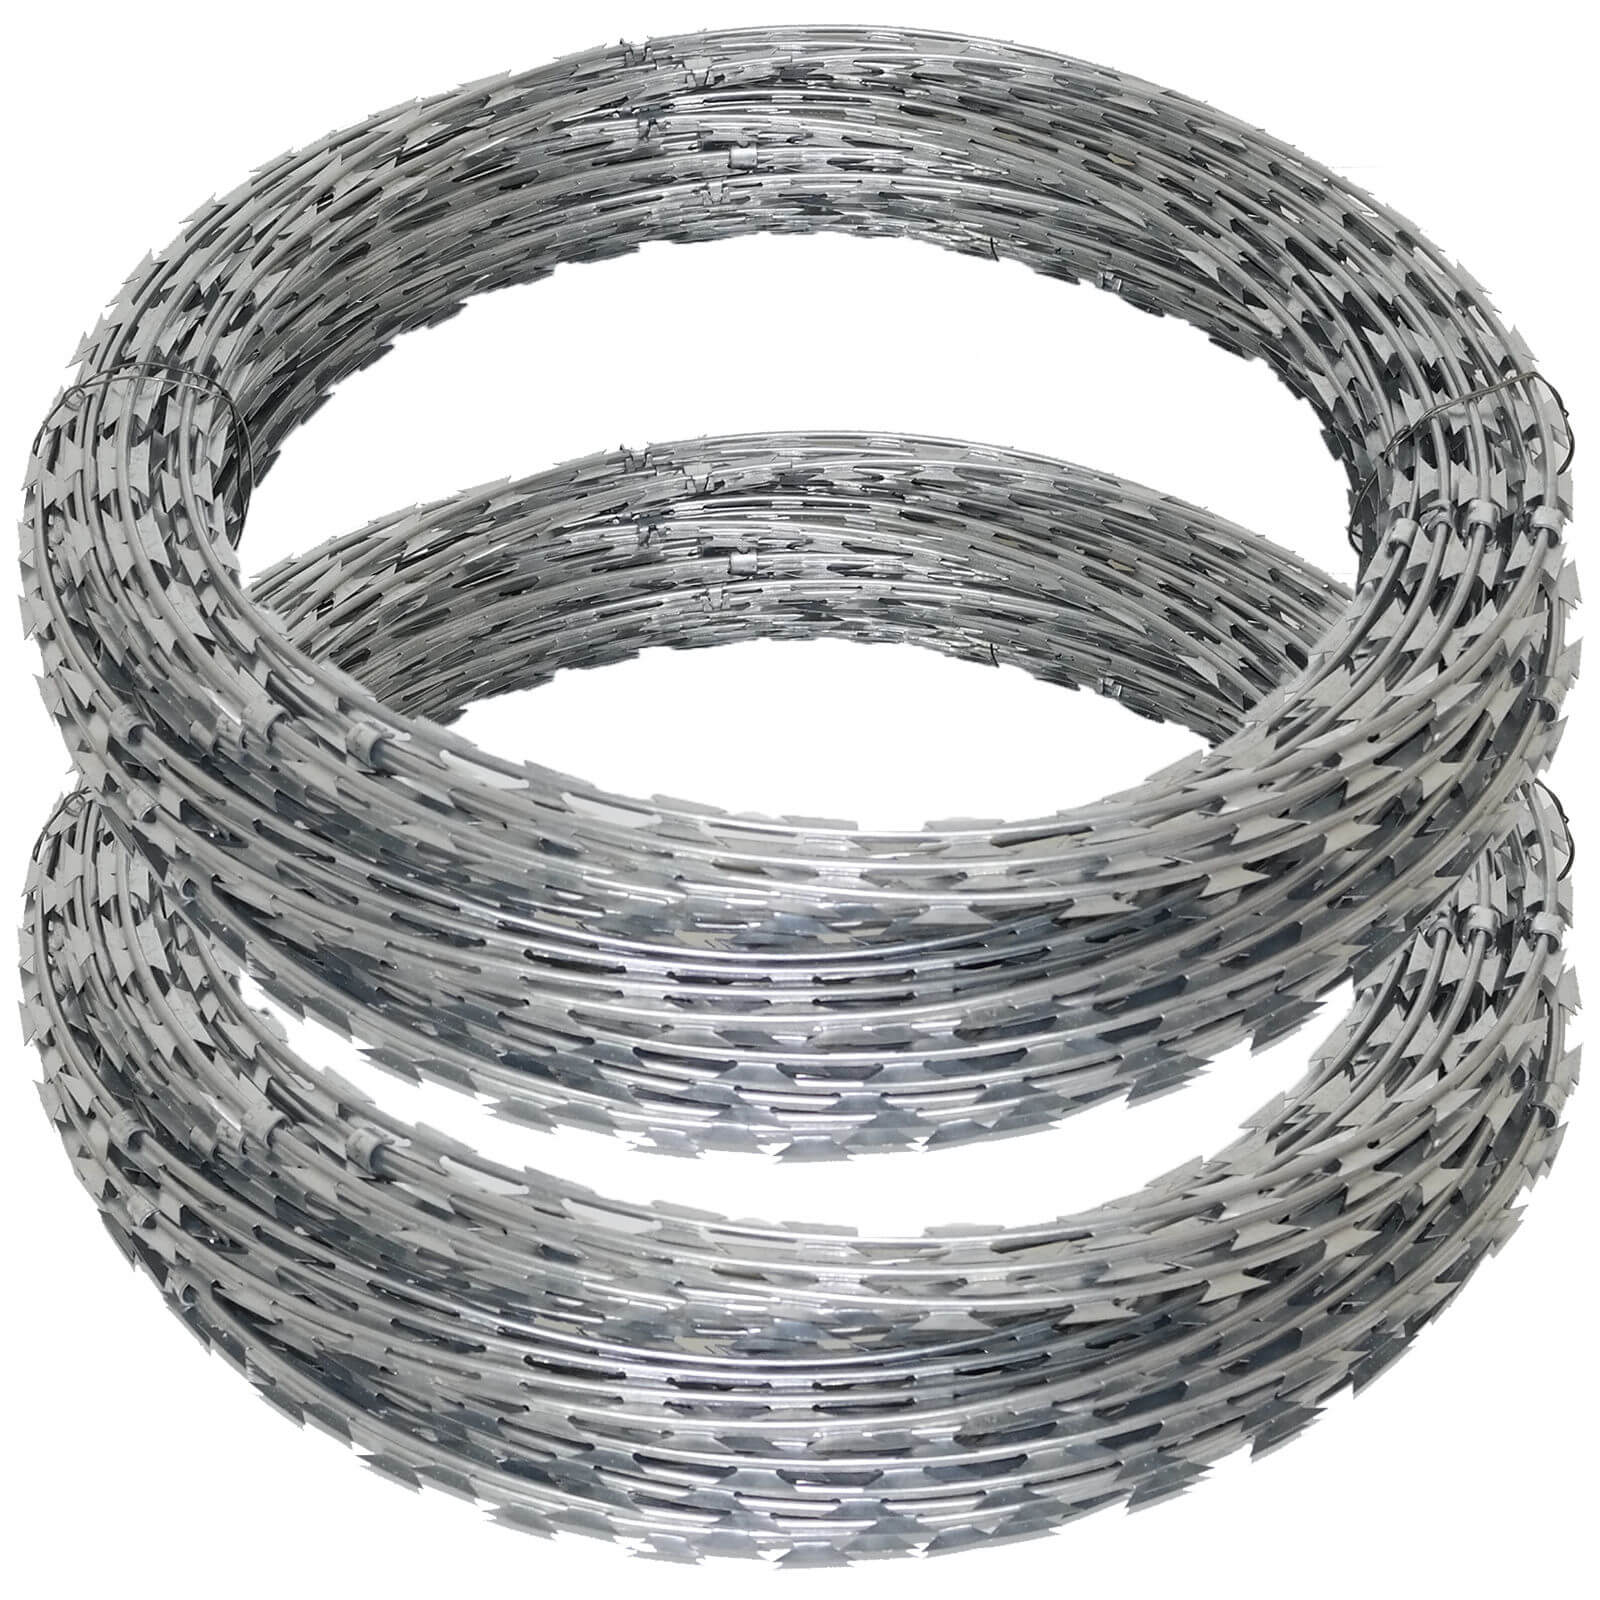 Razor wire fencing - reliable protection for your property